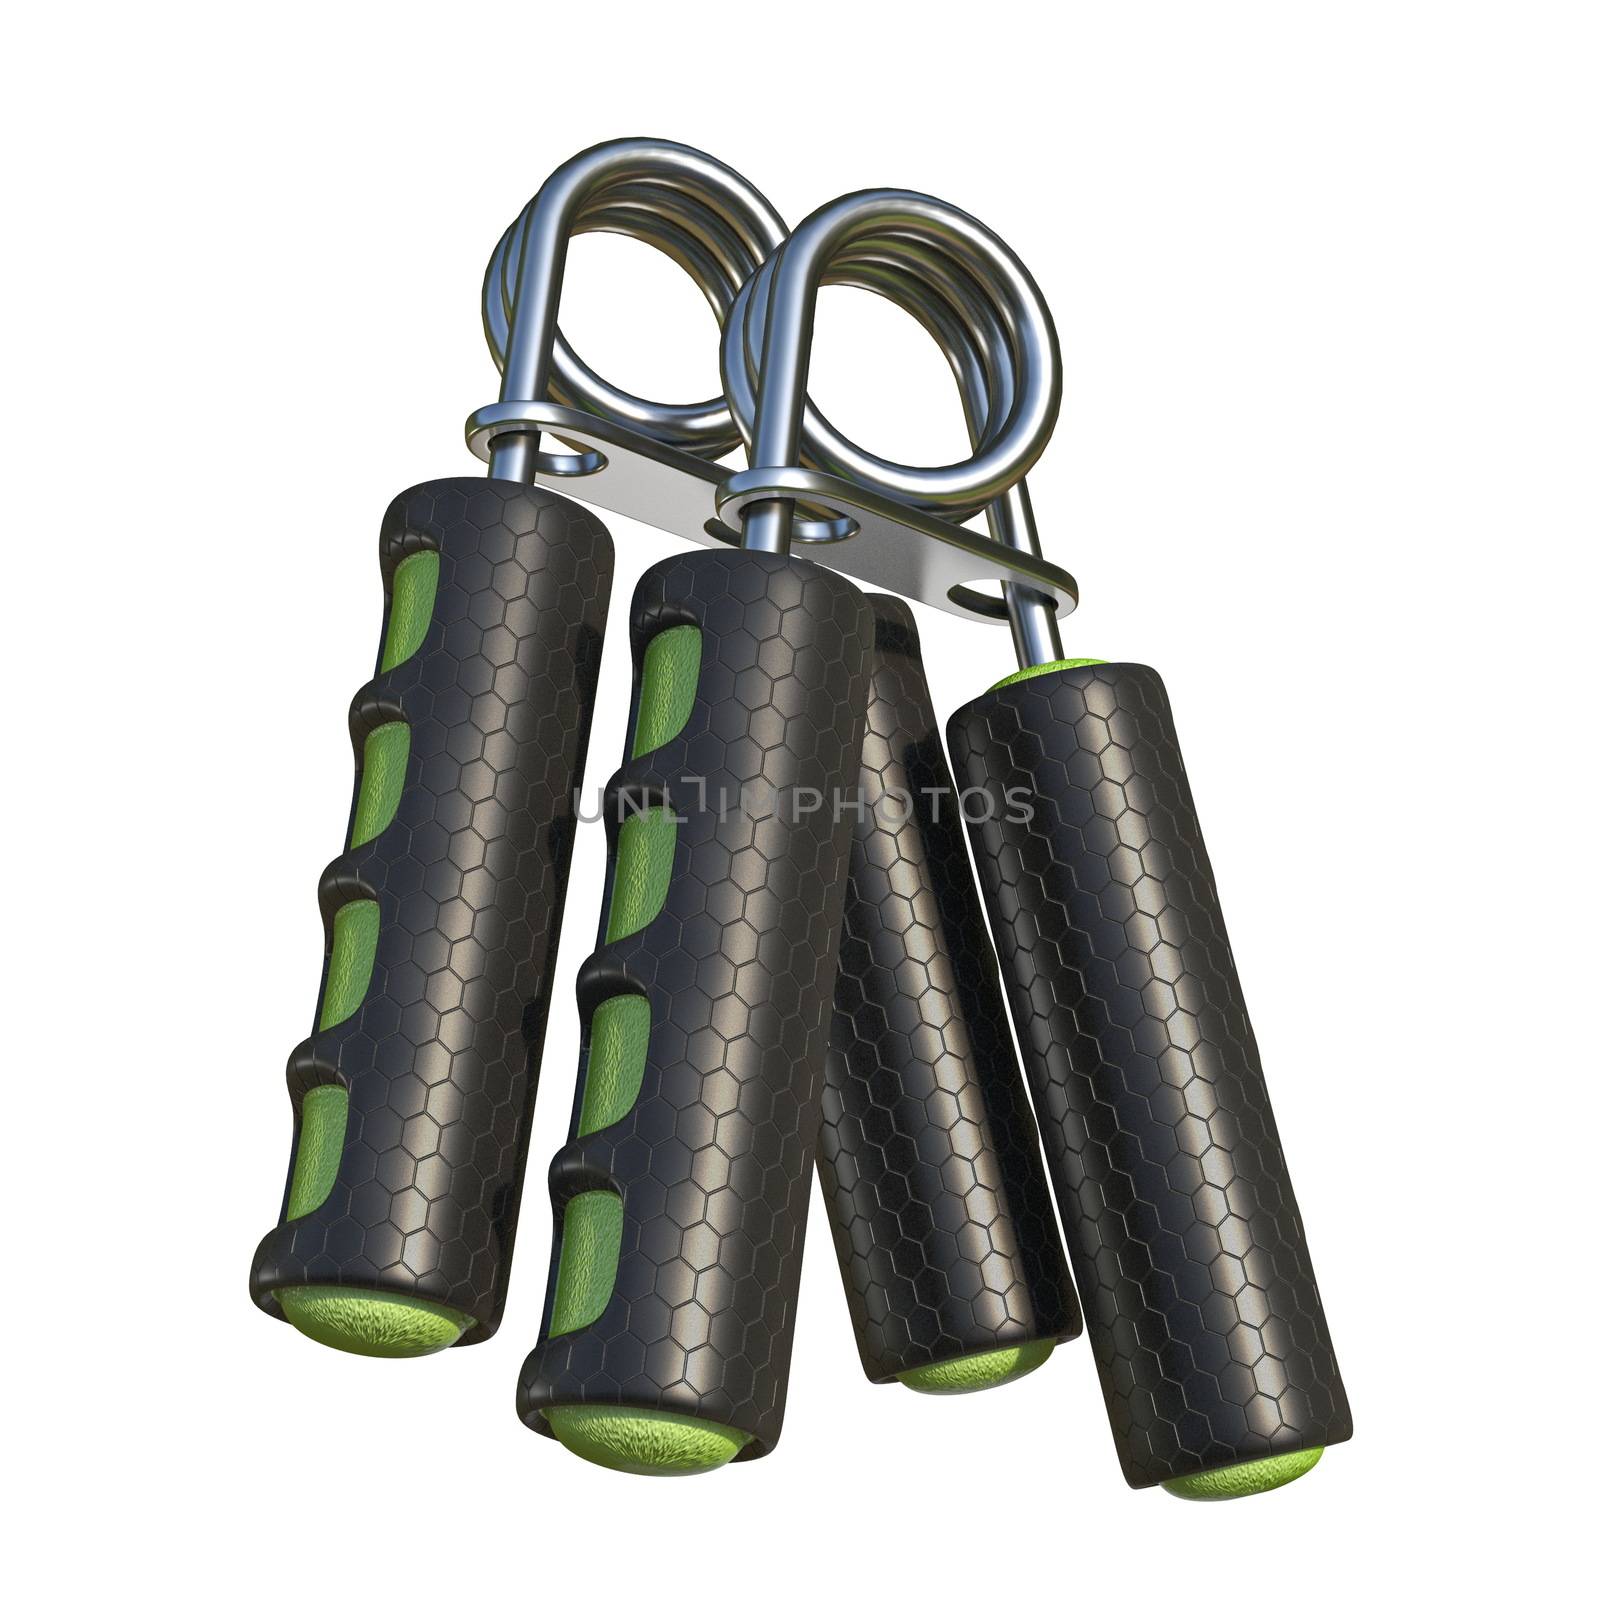 Two fitness hand grippers 3D render illustration isolated on white background